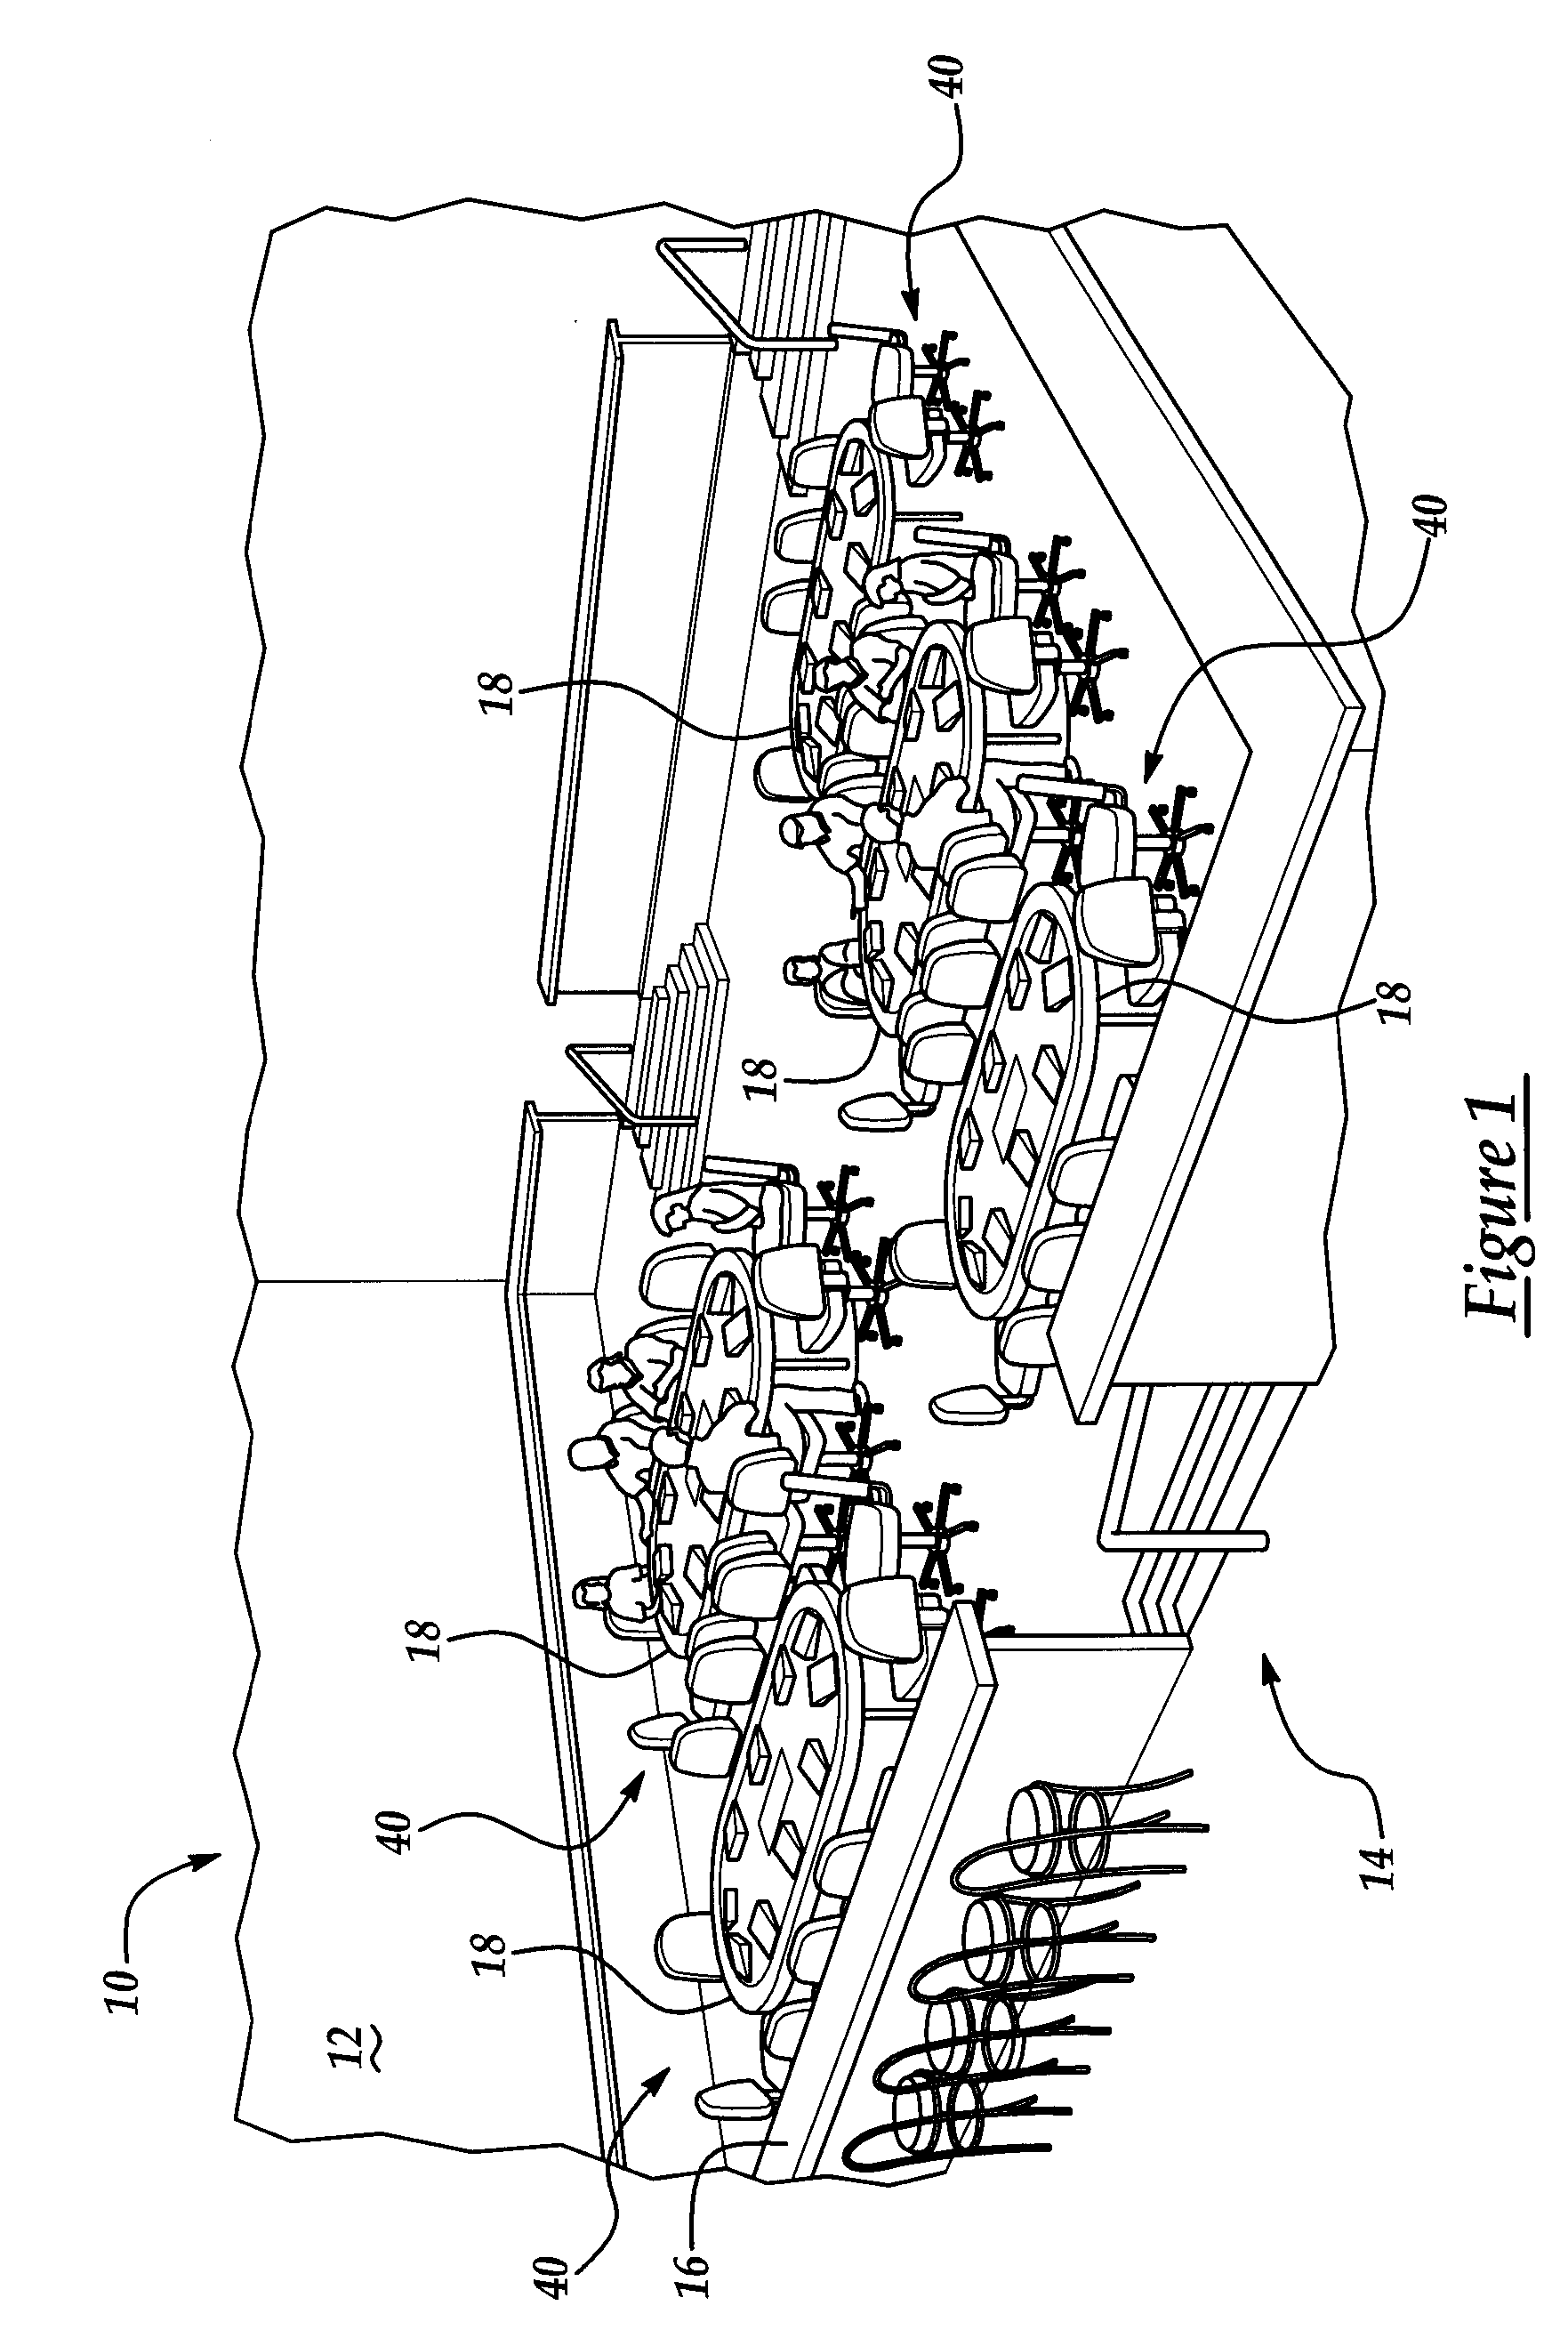 Host console of an electronic gaming system and method of moving a game controlled by the system